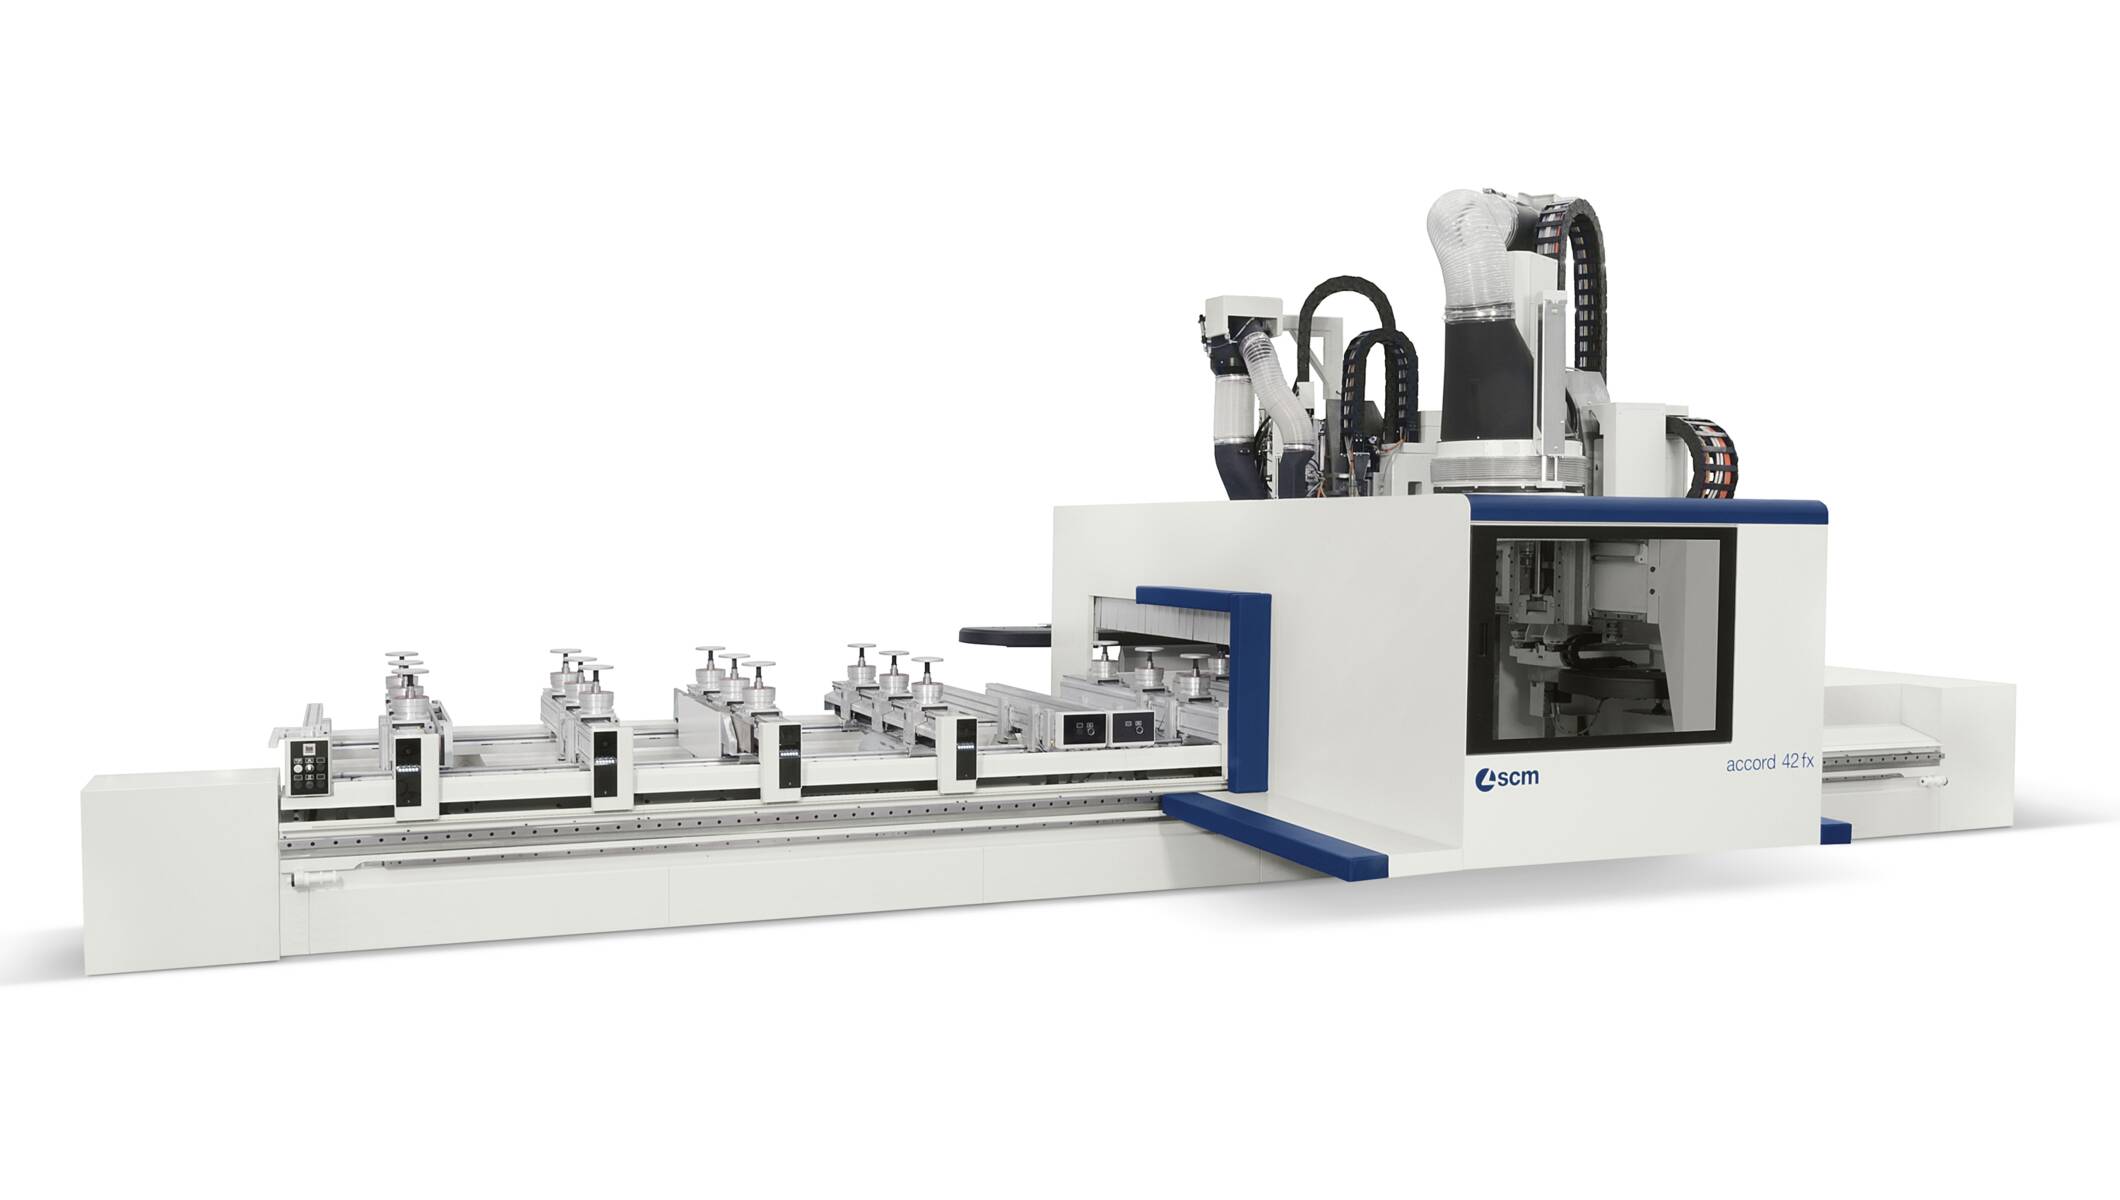 CNC Machining Centers - CNC Machining Centers for routing and drilling - accord 42 fx